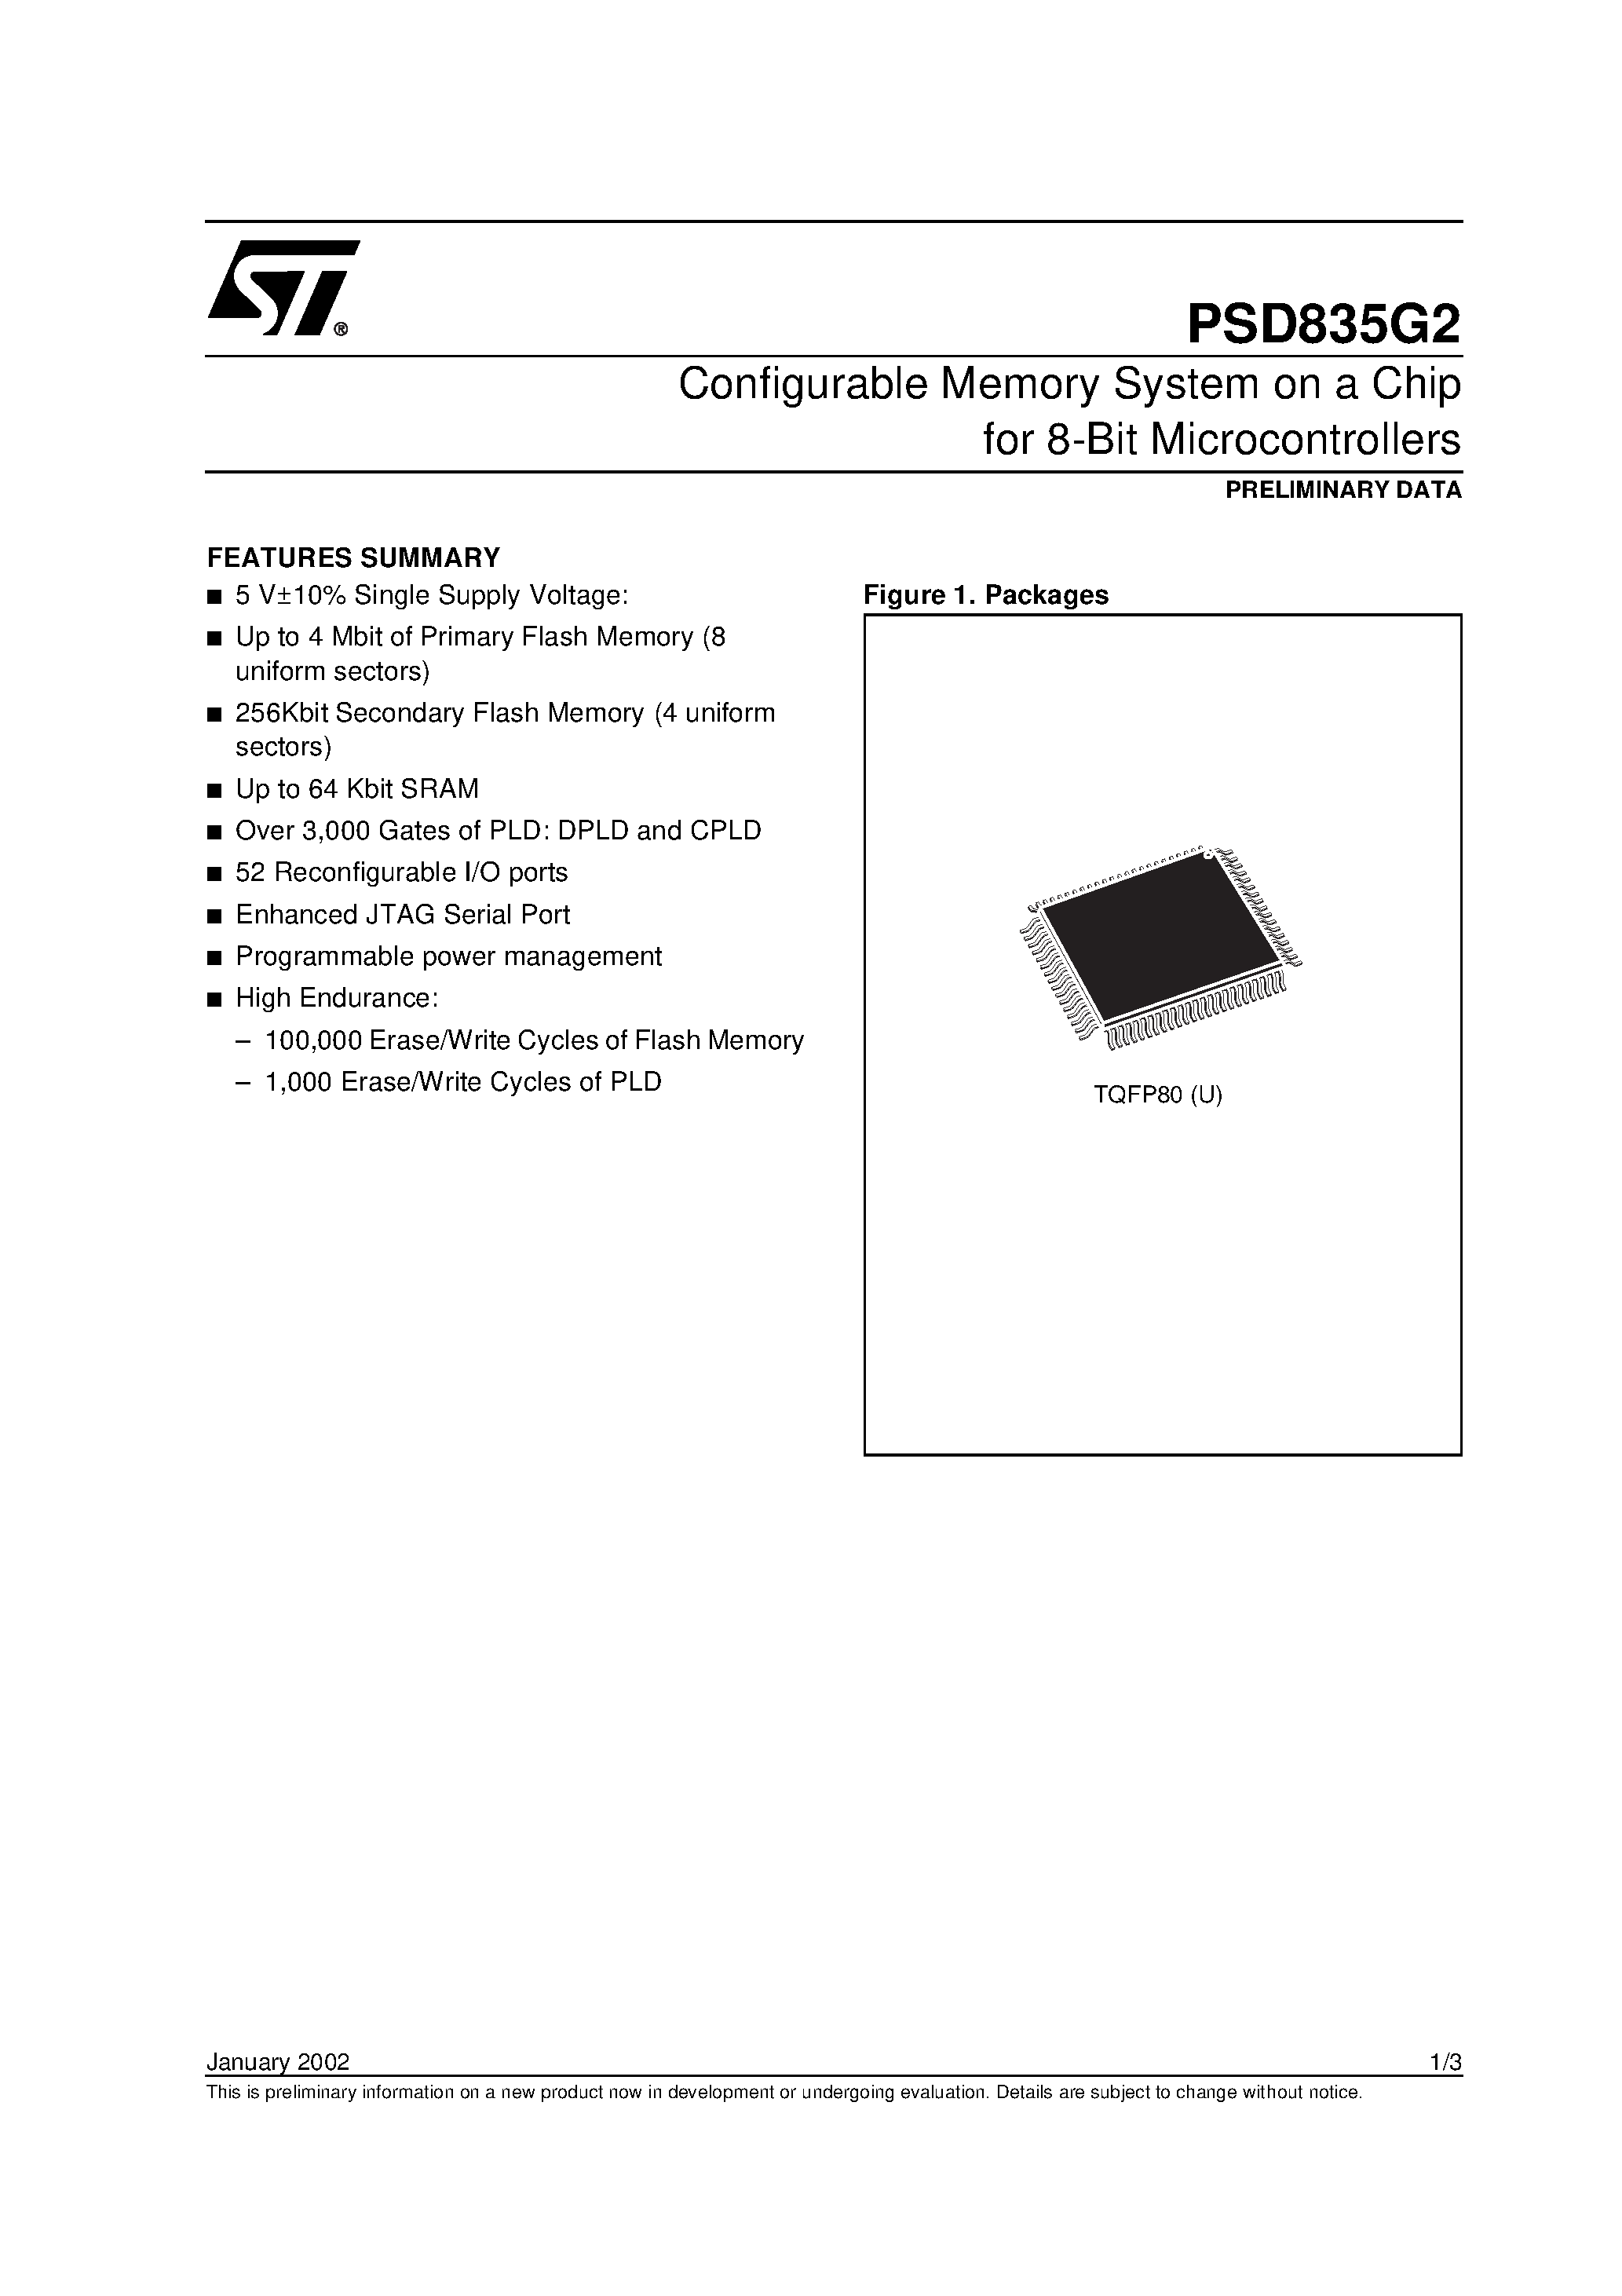 Datasheet PSD835F2-A-12JI - Configurable Memory System on a Chip for 8-Bit Microcontrollers page 1